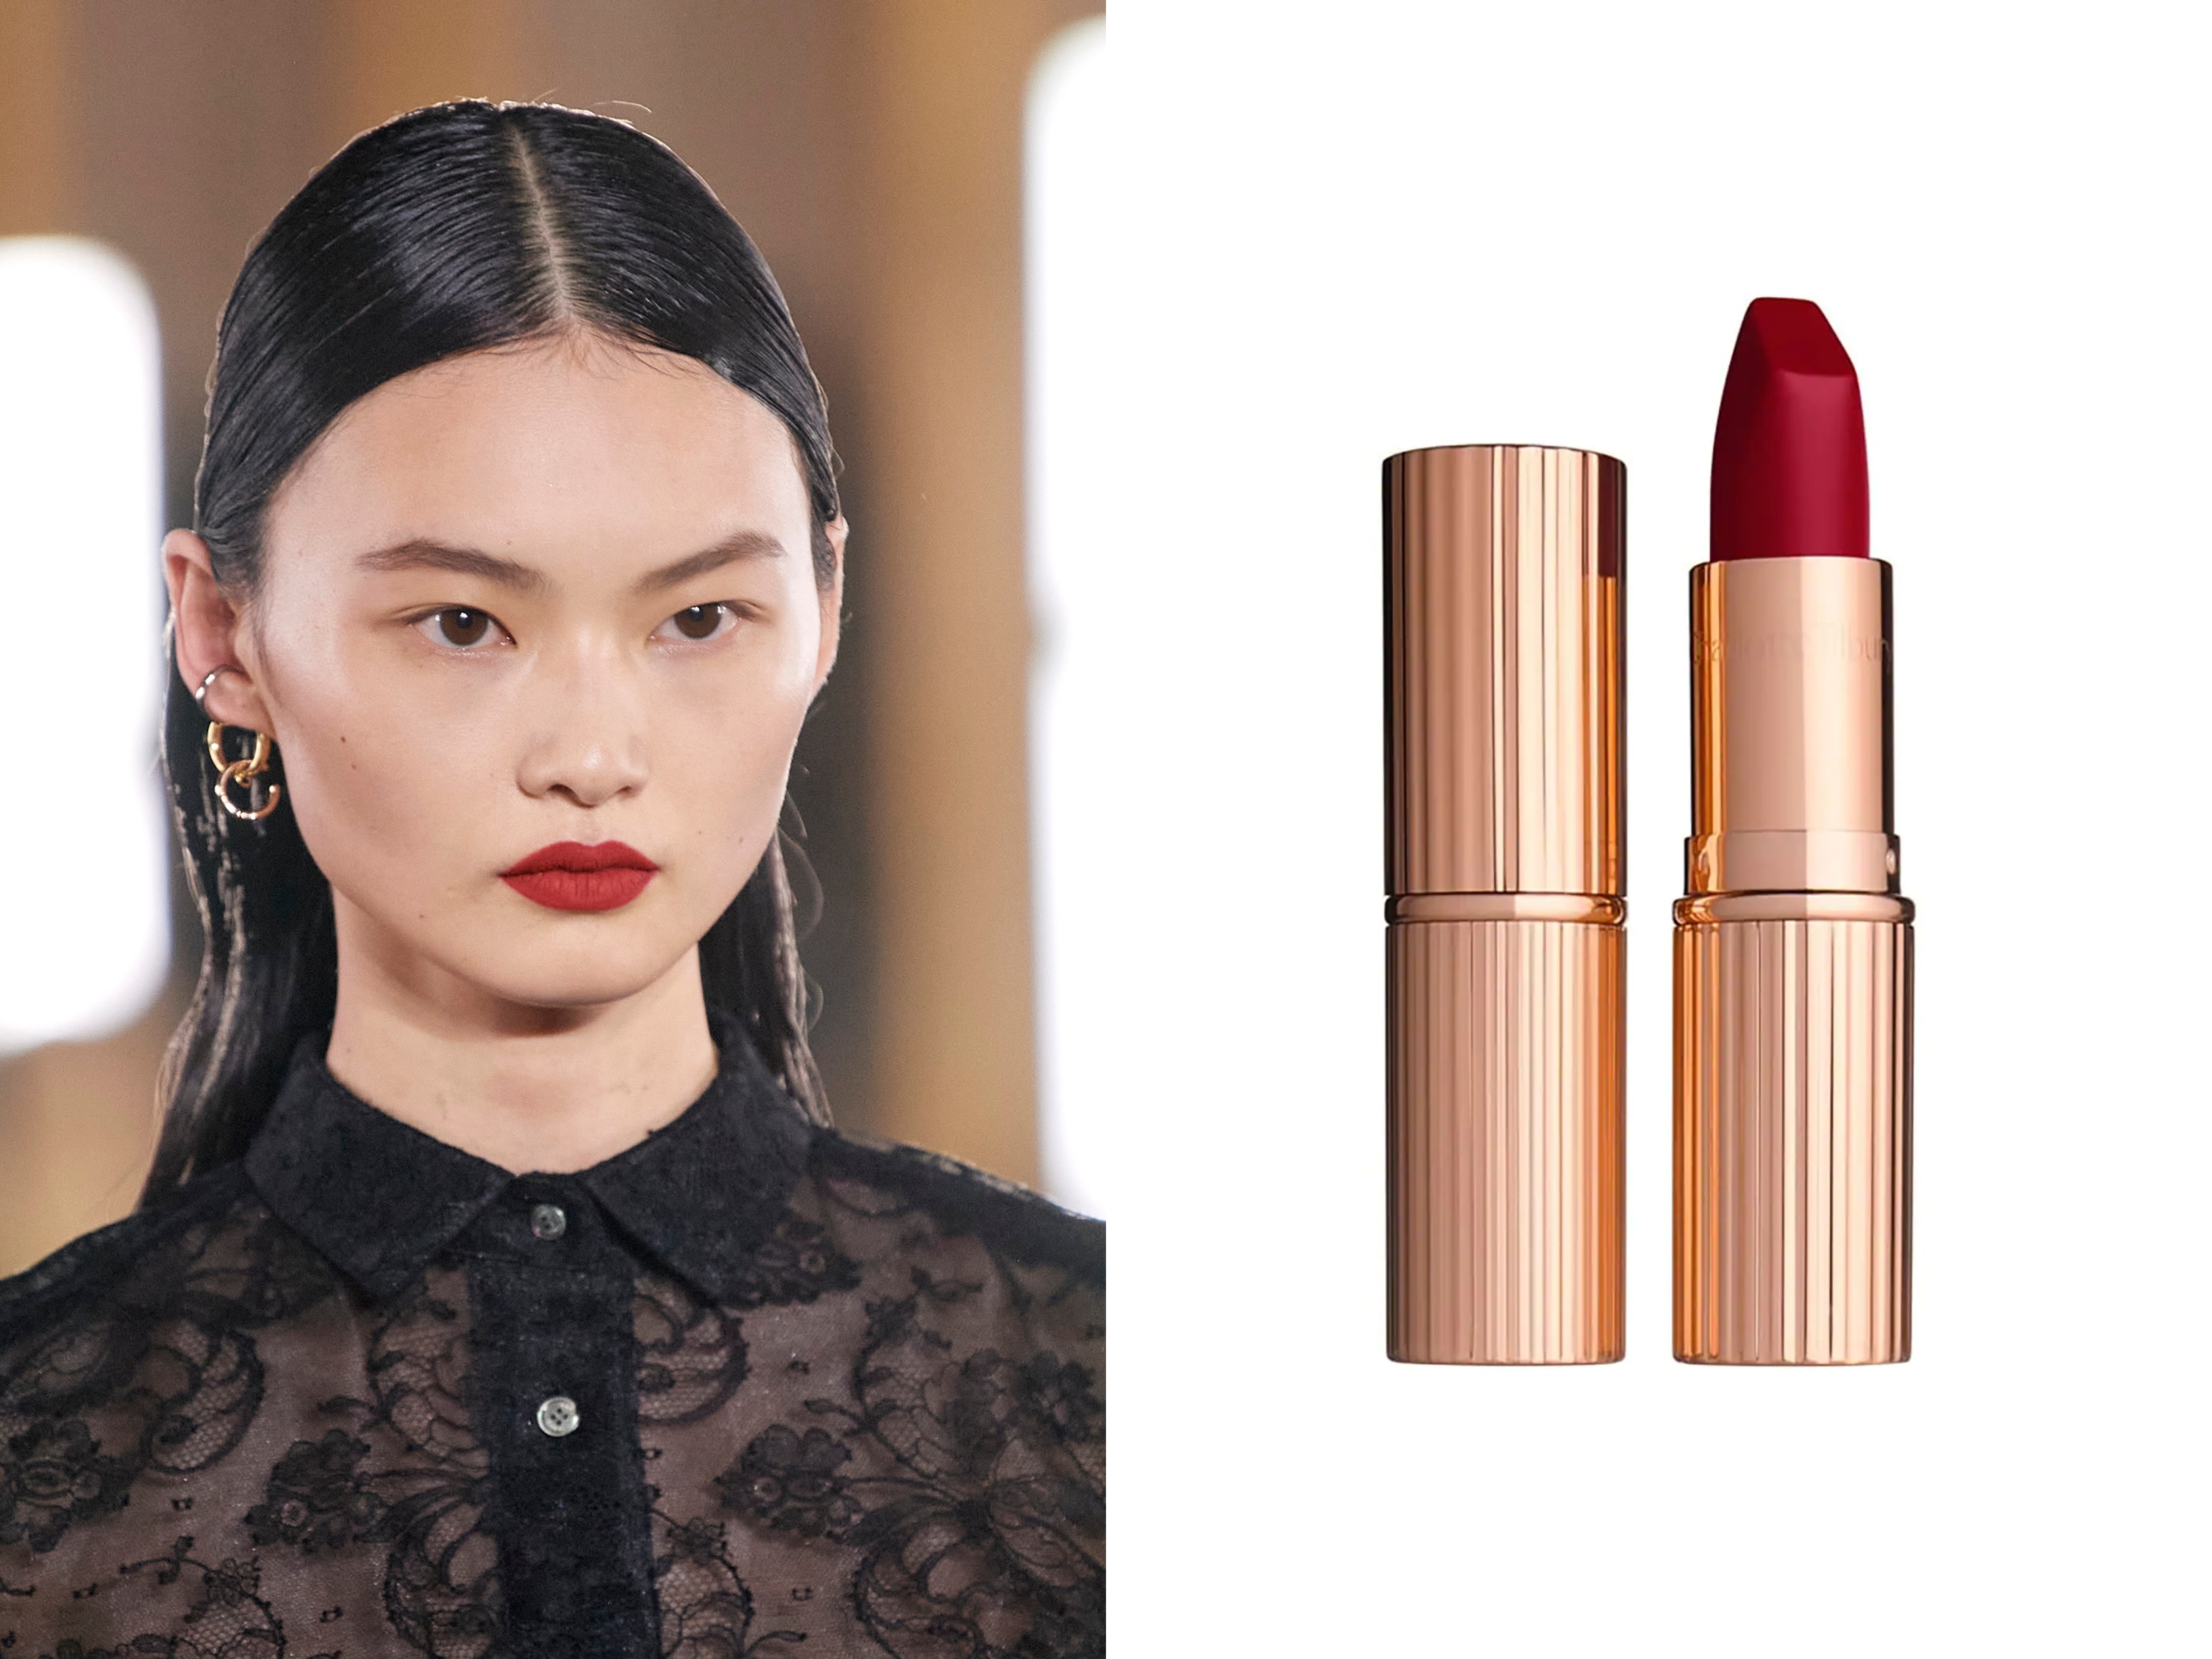 Sacai FW22 and Matte Revolution lipstick in 'Red Carpet Red' by Charlotte Tilbury